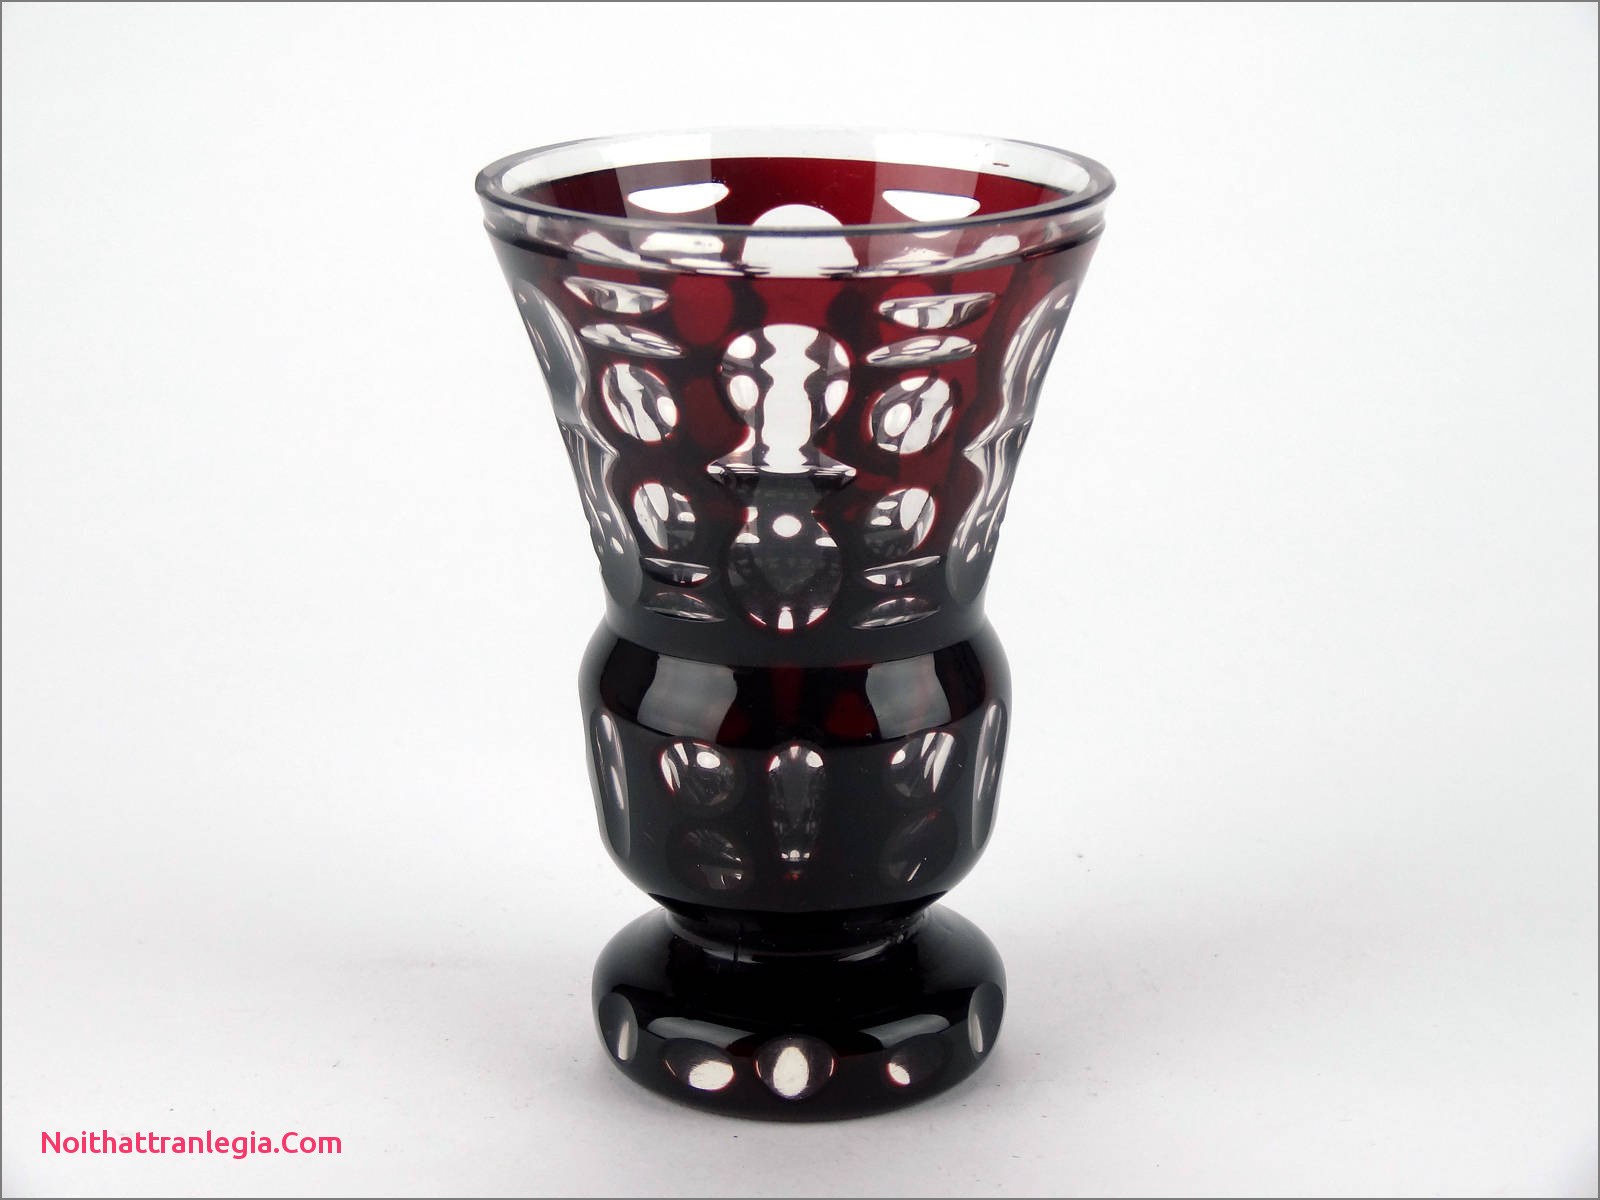 18 attractive Small Antique Glass Vases 2022 free download small antique glass vases of 20 cut glass antique vase noithattranlegia vases design inside antique c1910 bohemian cut to clear red glass vase czech ruby red cut glass goblet